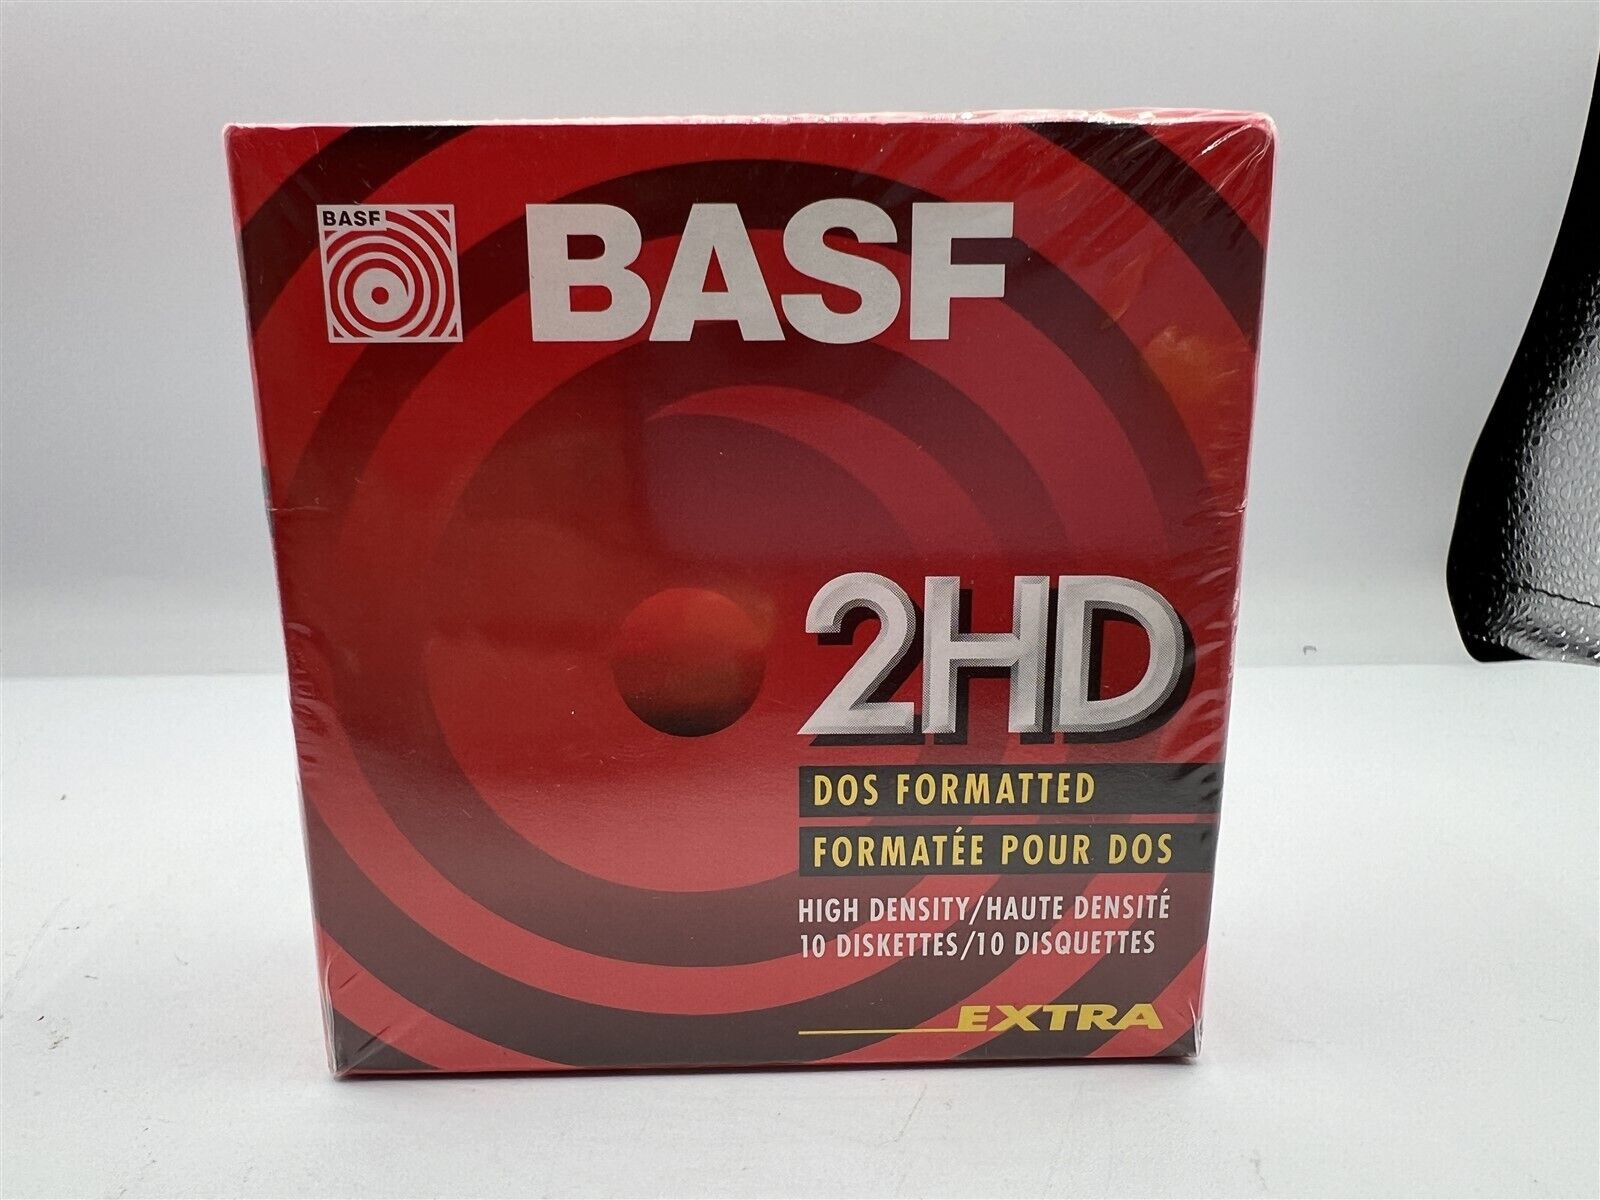 SEALED BASF 2HD DOS FORMATTED HIGH DENSITY 10 DISKETTES EXTRA